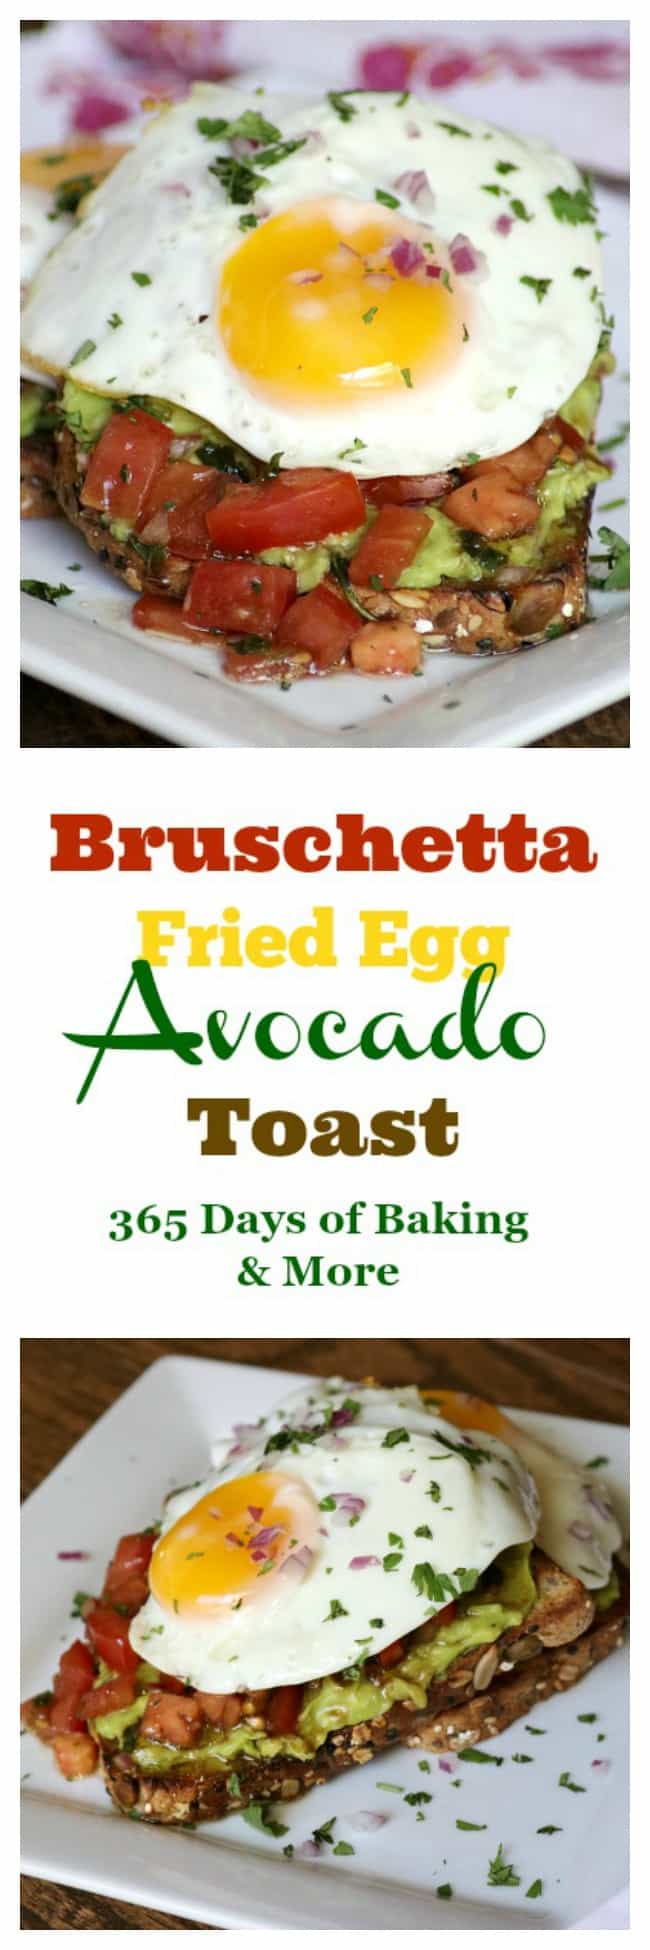 Bruschetta Fried Egg Avocado Toast with whole grain bread, smashed avocado, marinated tomato and a fried egg are sure to give you a great start to your day!